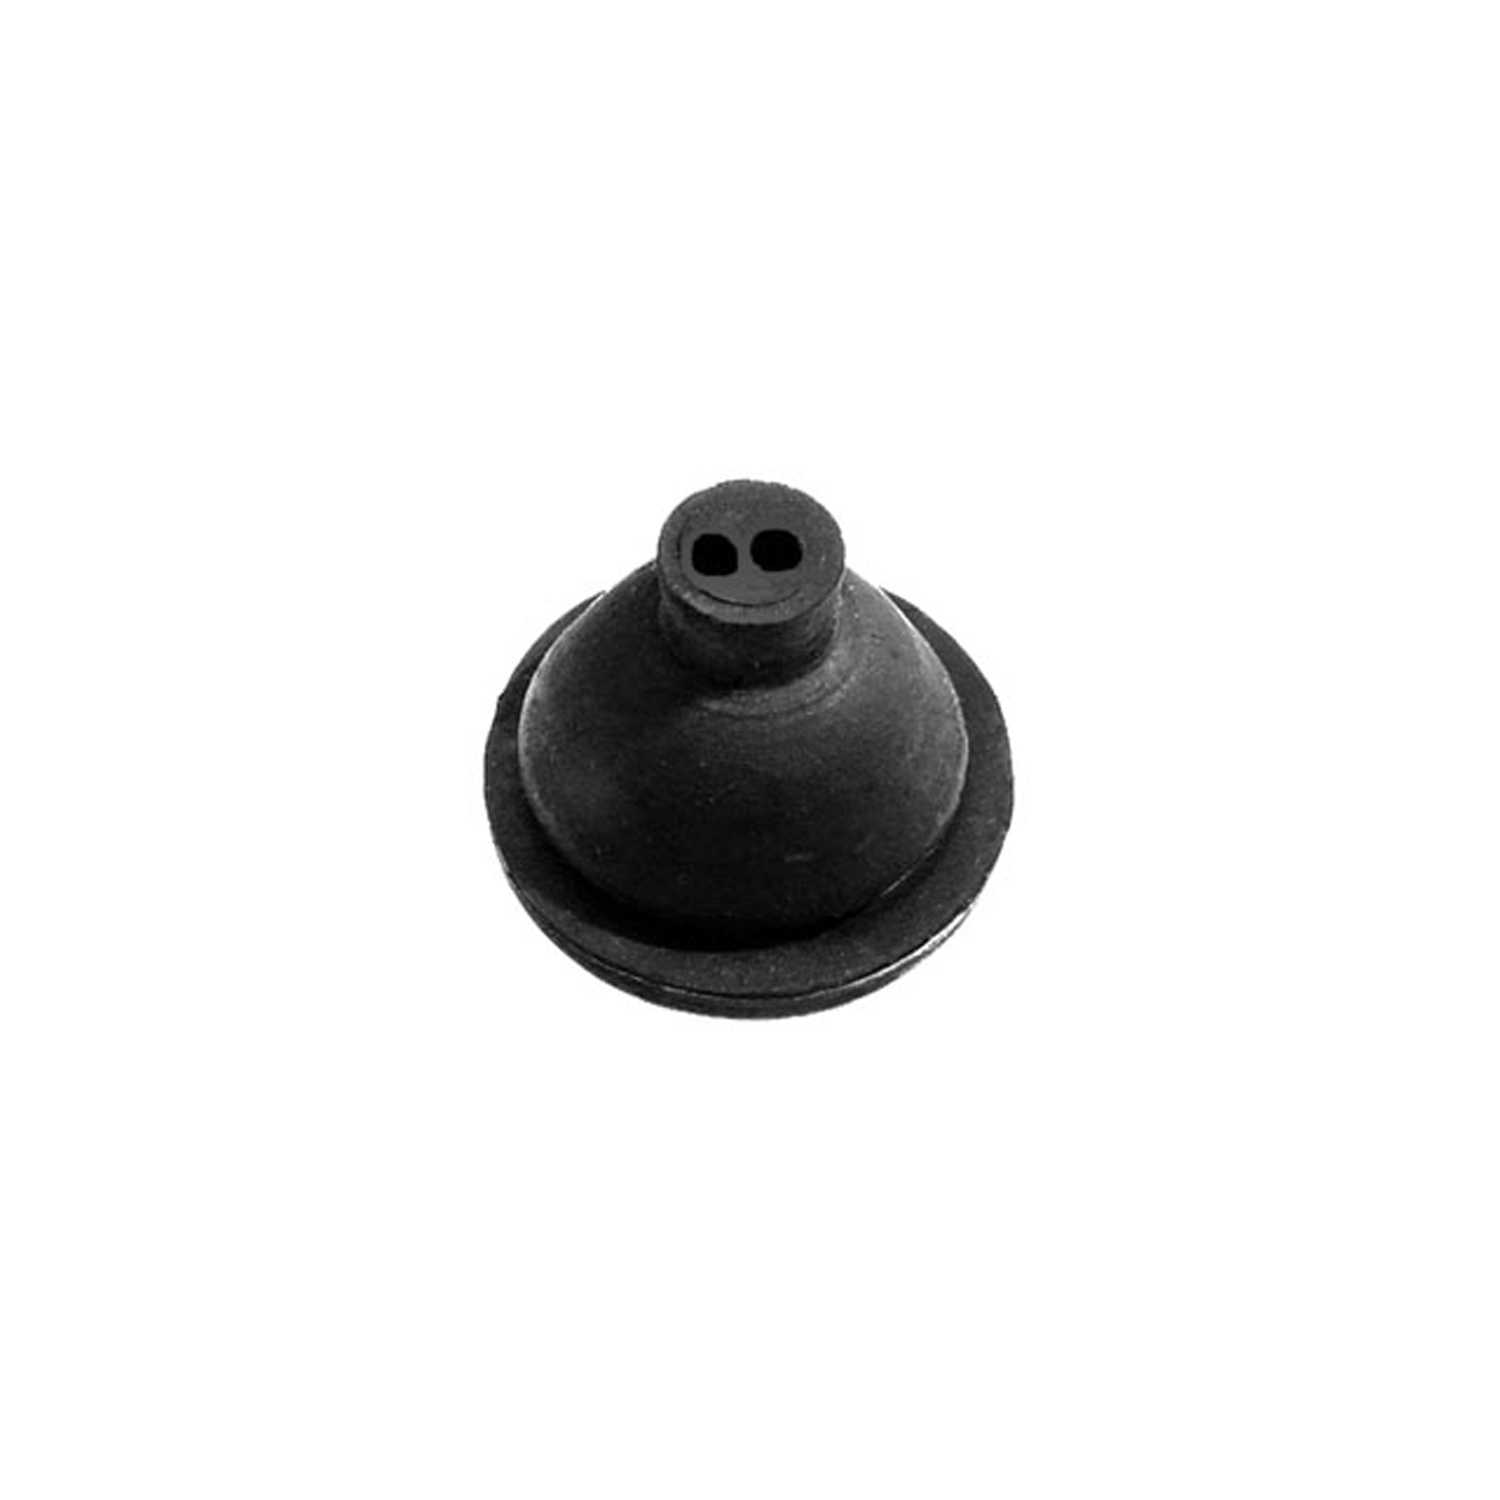 1968 Chevrolet G20 Van Dash  Firewall Grommet.  Double-hole type for two wires-RP 1-G